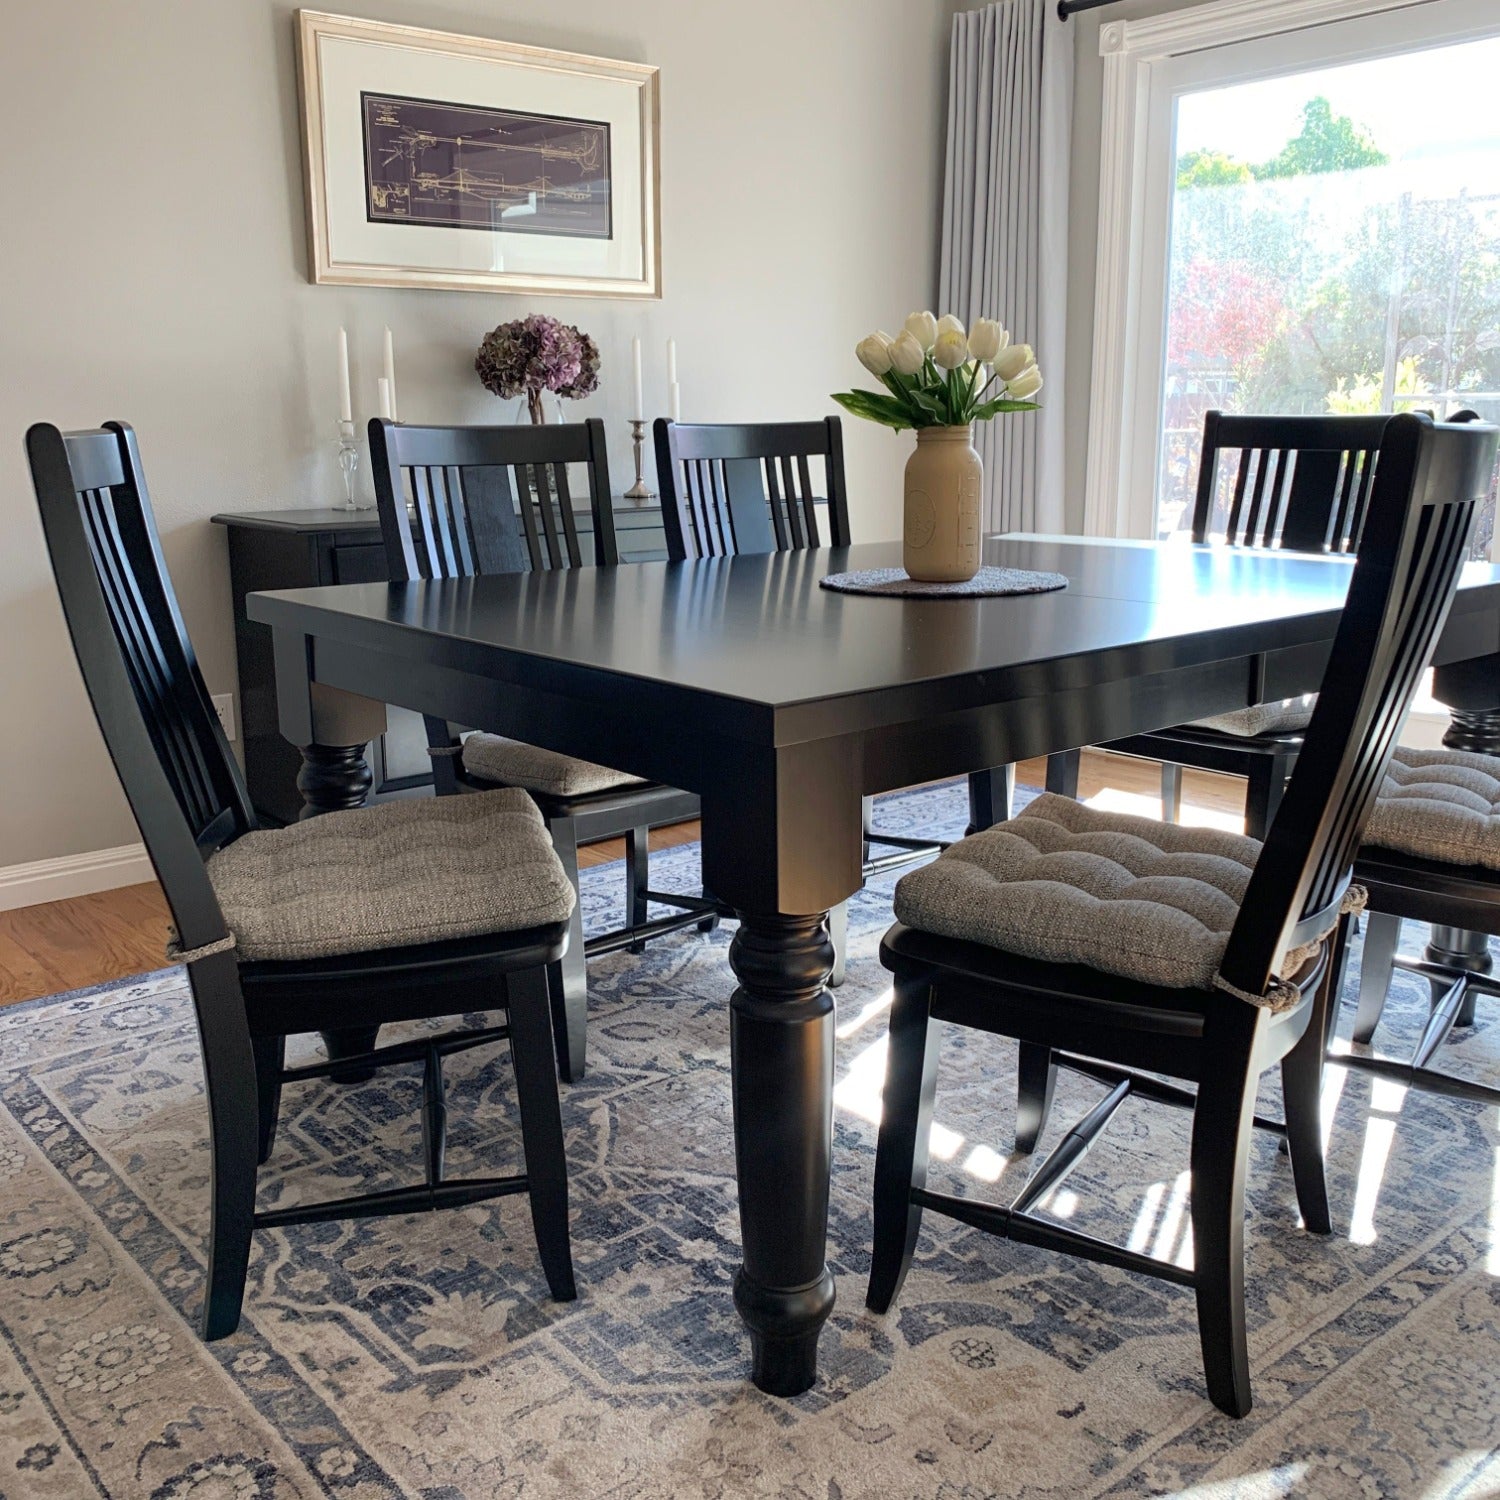 gray tweed dining chair cushions on black dining chairs in formal dining room